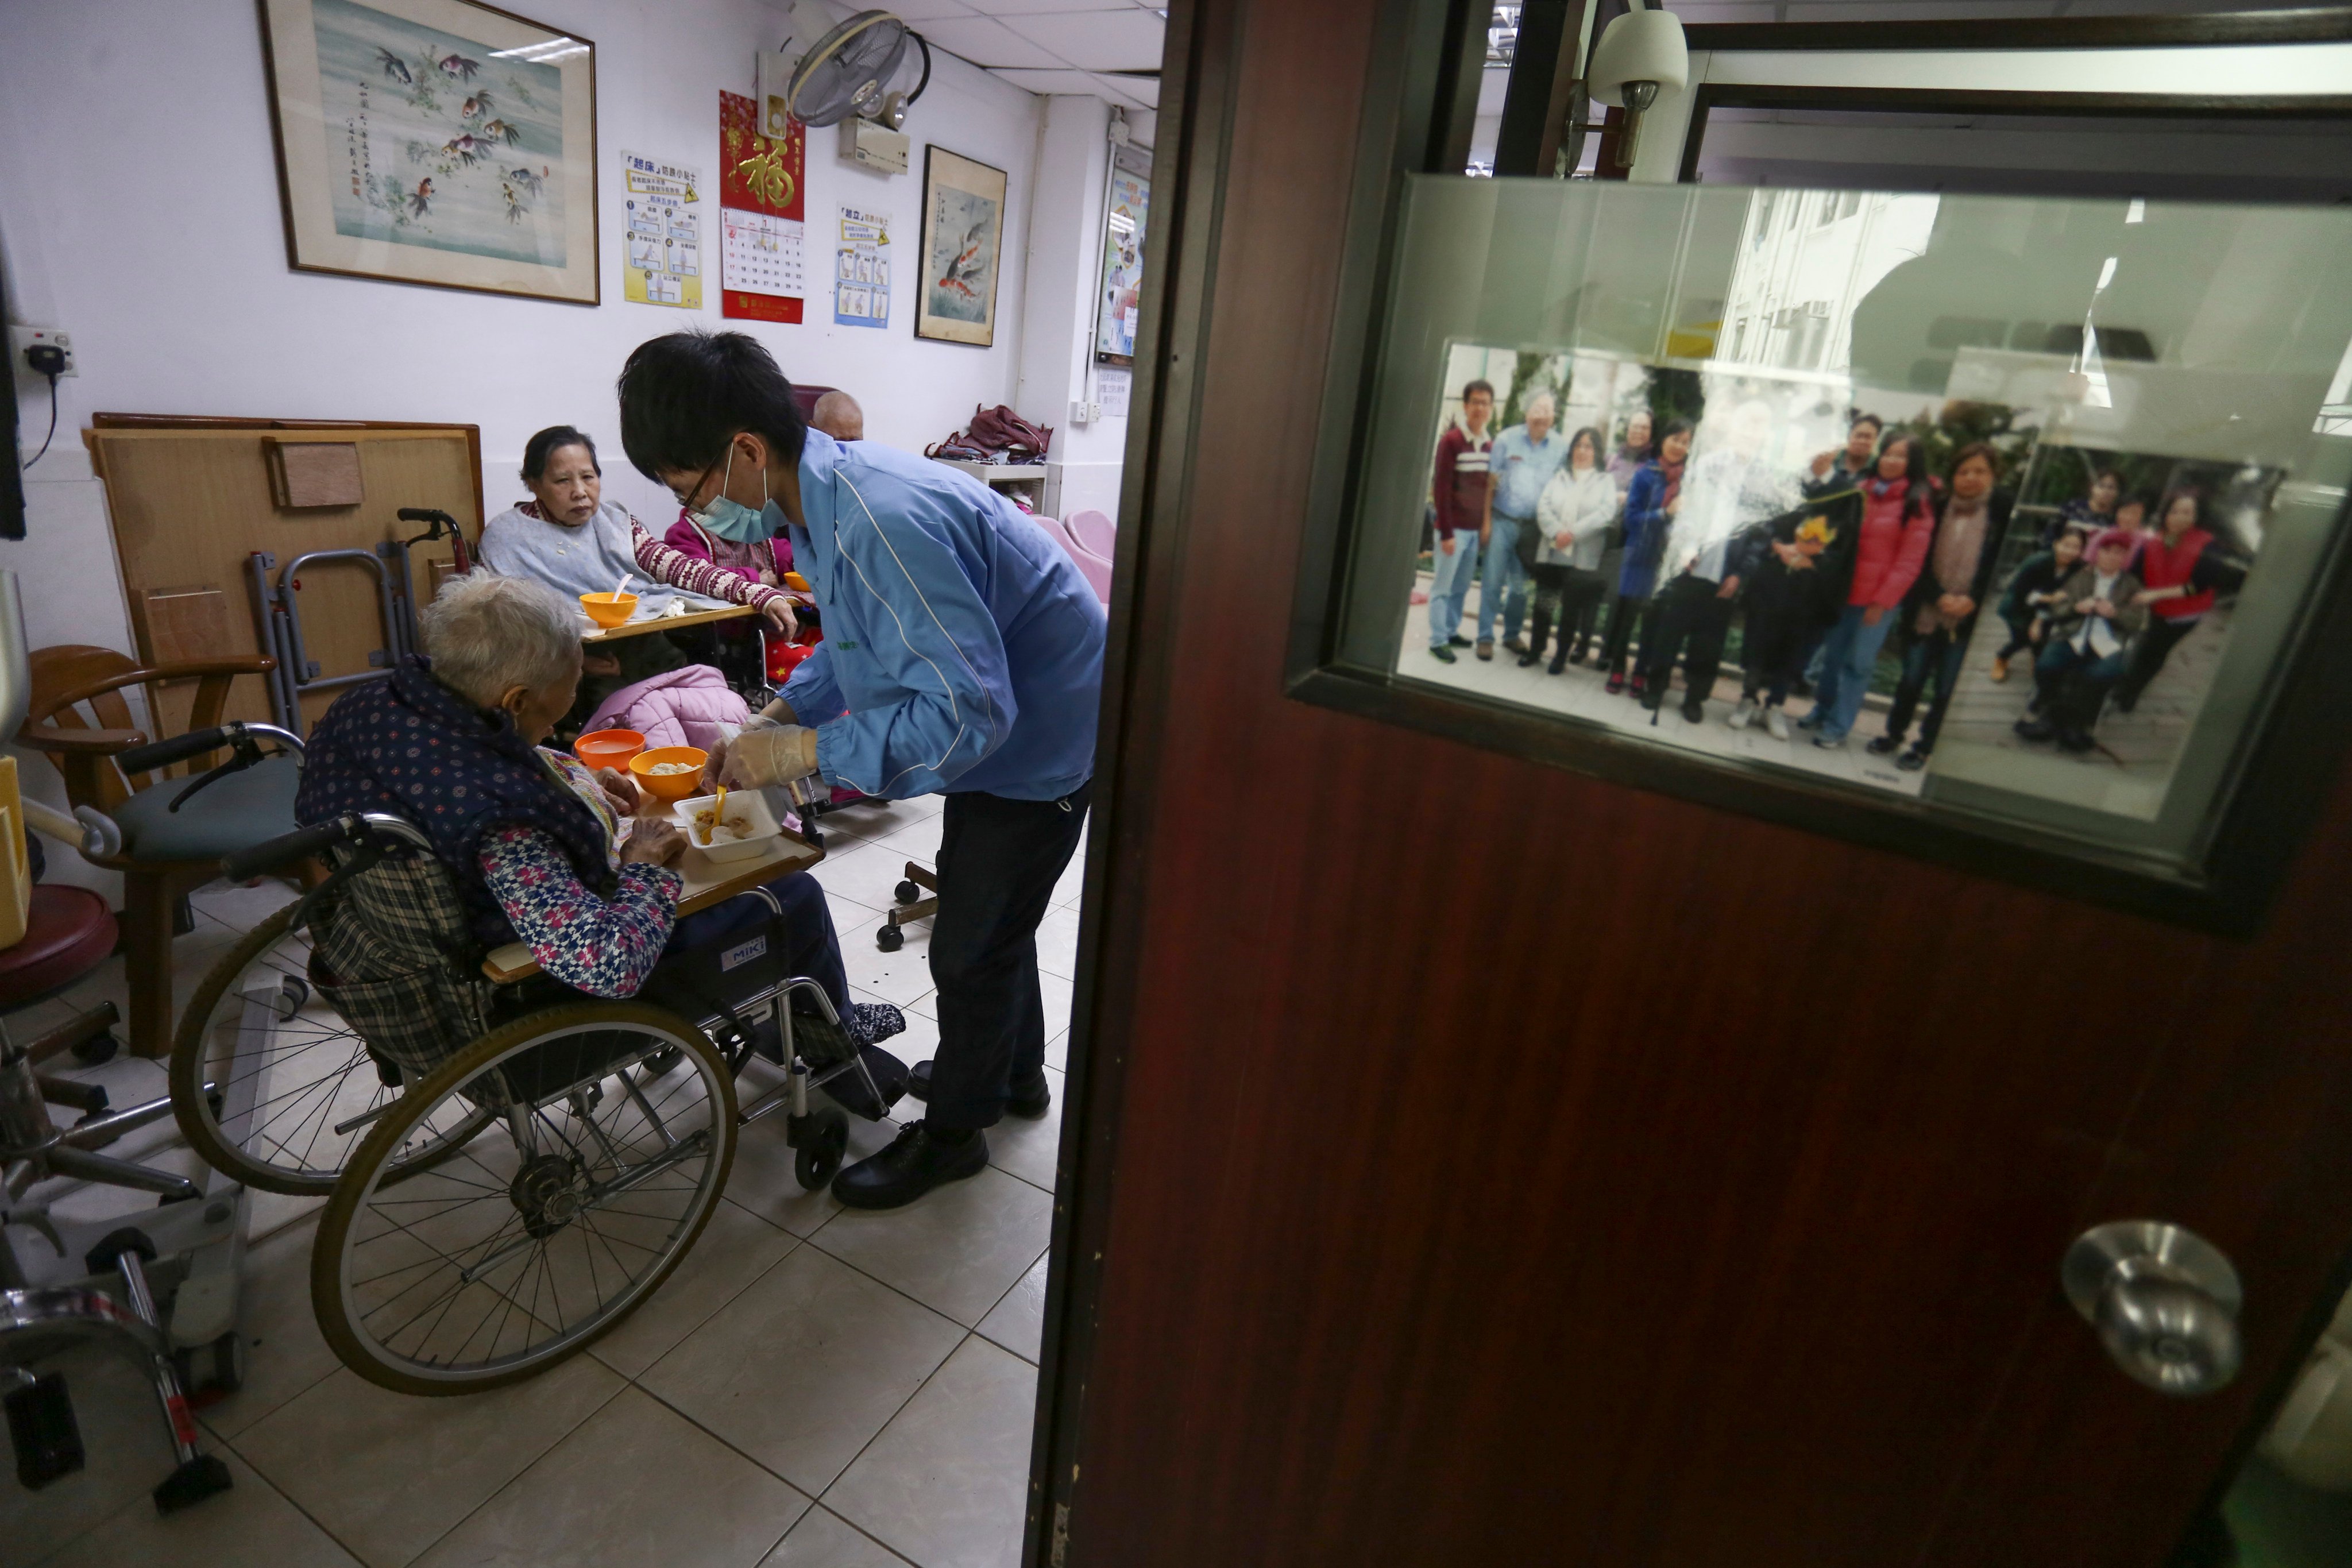 A healthcare worker attends to an elderly resident at a nursing home in Sham Shui Po. Photo: Jonathan Wong